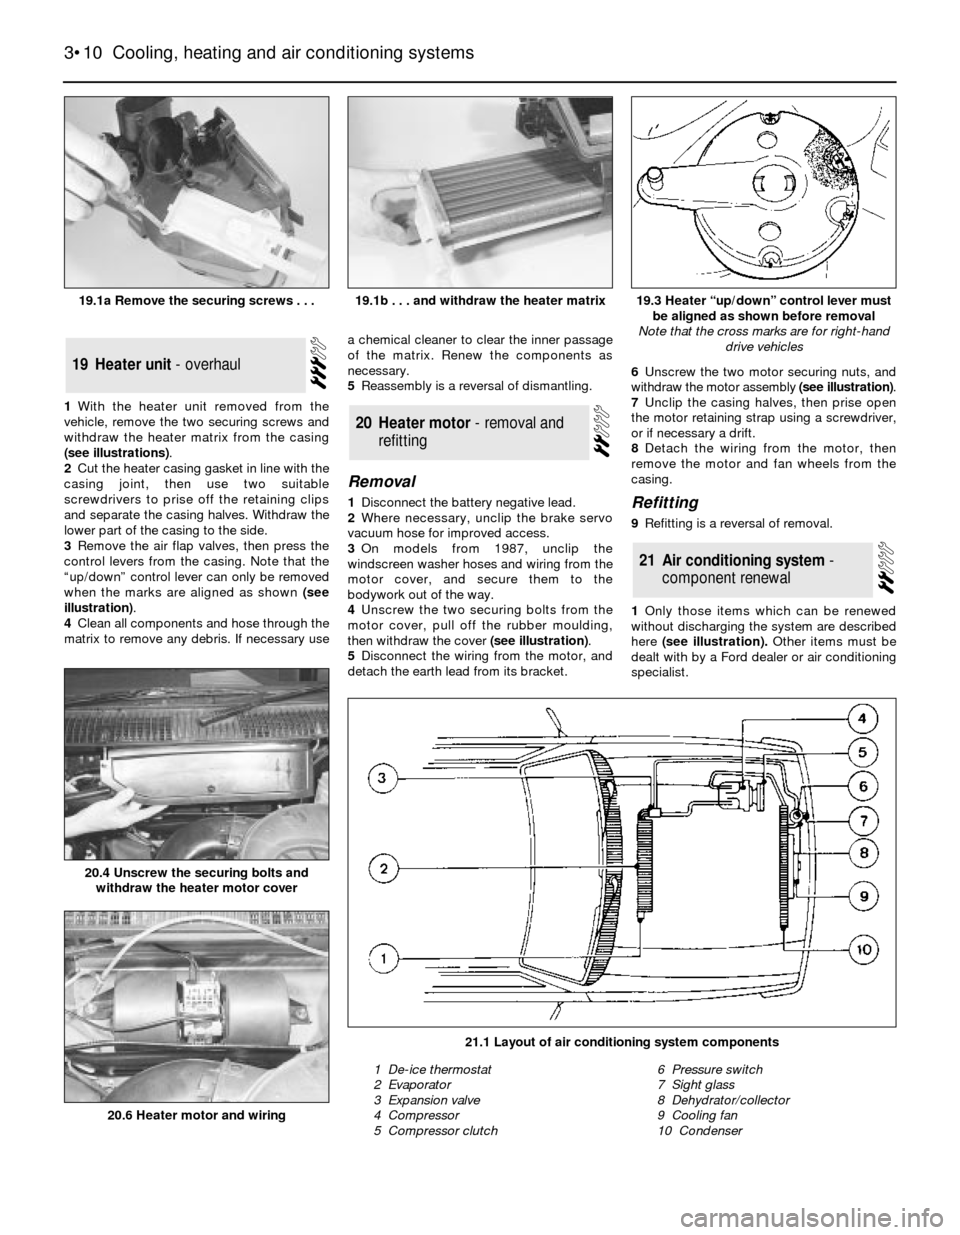 FORD SIERRA 1989 2.G Cooling And Air Conditioning Systems Workshop Manual 1With the heater unit removed from the
vehicle, remove the two securing screws and
withdraw the heater matrix from the casing
(see illustrations).
2Cut the heater casing gasket in line with the
casing